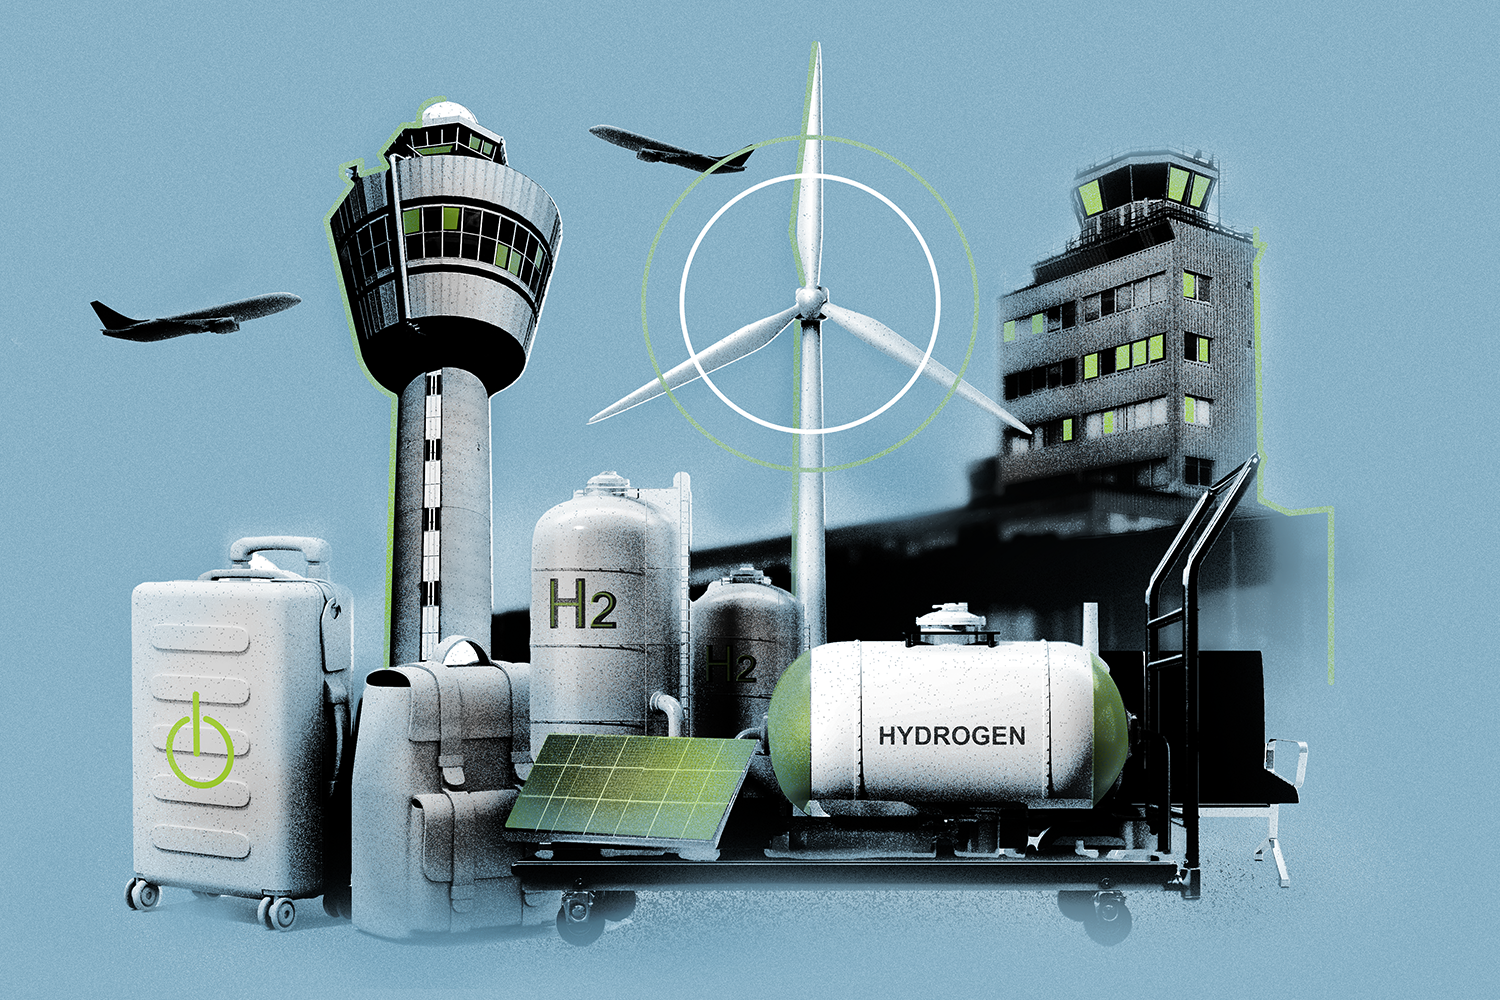 Collage image of airport symbols and clean energy highlighted in green on a blue background.